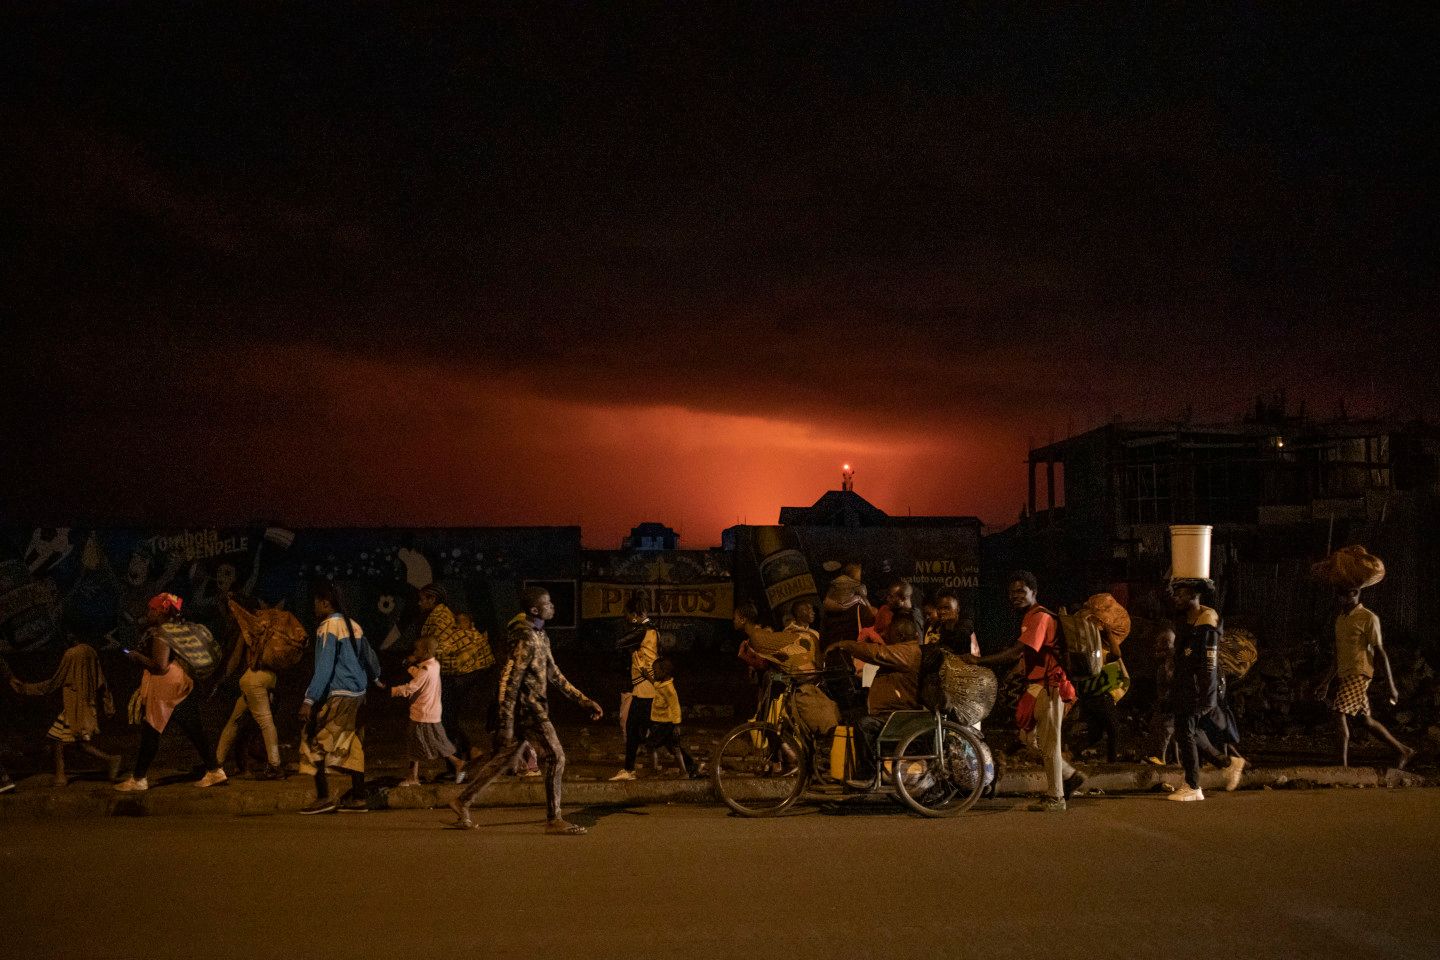 Goma, North Kivu Province, May 2021. People flee from the erupting Nyiragongo volcano. Mount Nyiragongo is one of the world’s most active and dangerous volcanos. On May 22nd 2021 it erupted and a wall of lava stopped just short of the city center and Goma’s international airport, but destroyed 17 villages and left at least thirty-two people dead. Up to 20,000 people lost their homes. Many people returned to town the following morning once the lava had stopped flowing, but several hundred aftershocks in the following days kept residents on edge.